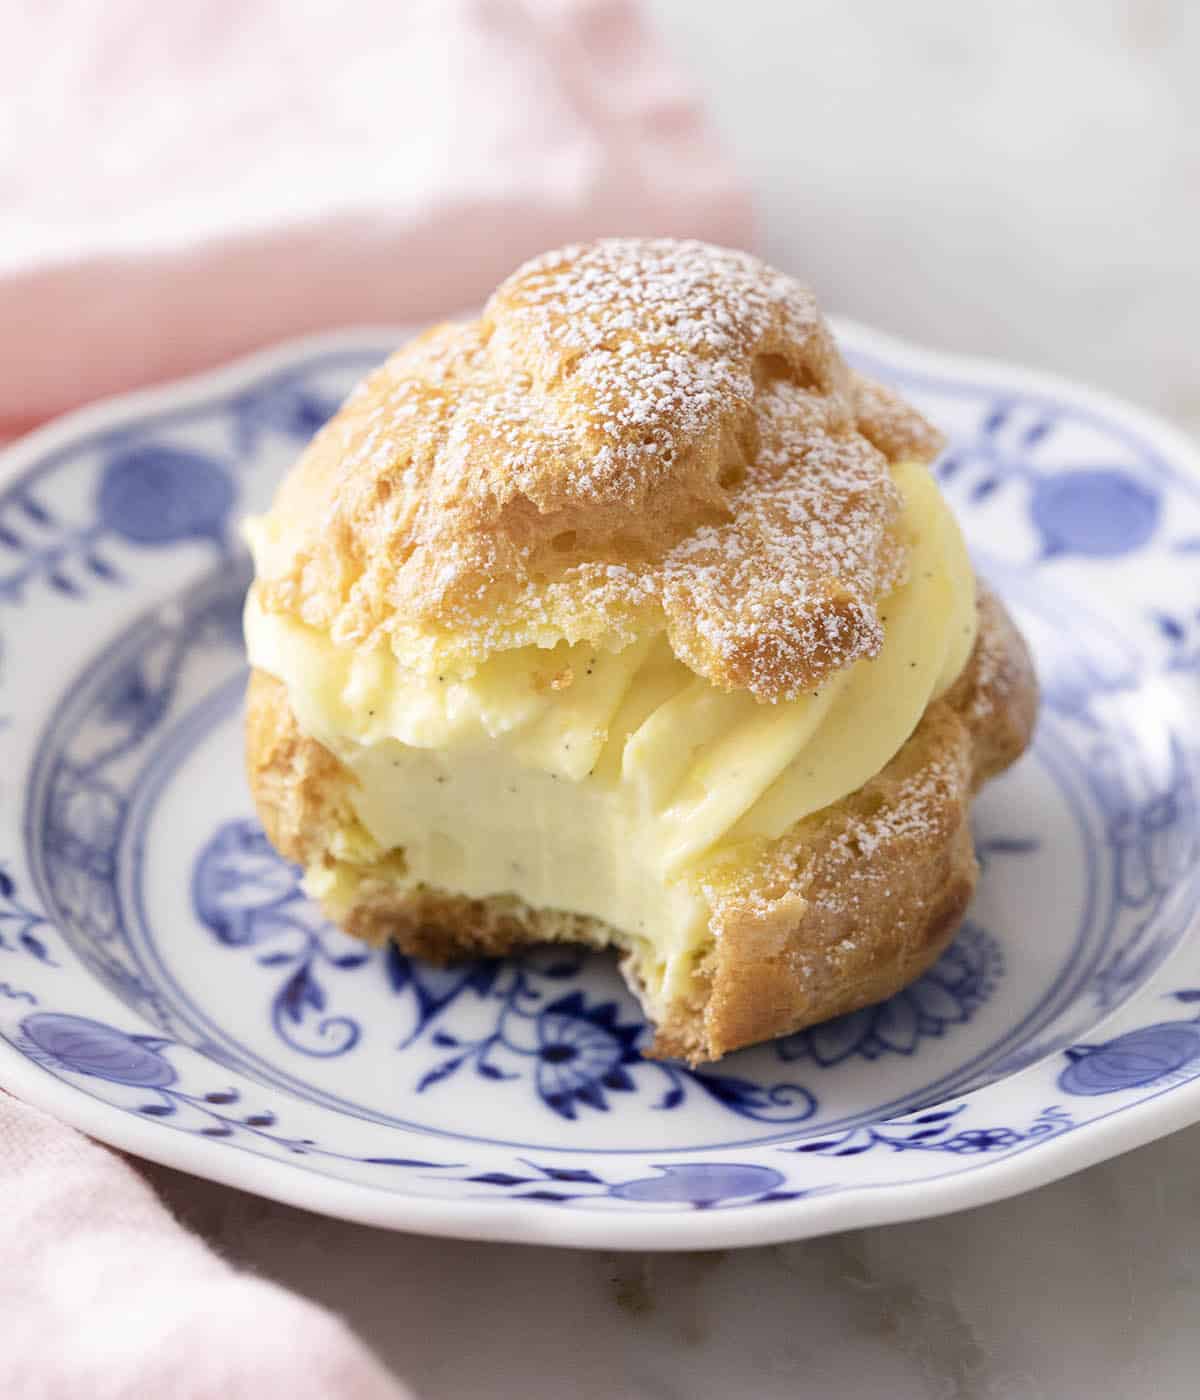 A cream puff with a bite taken out.